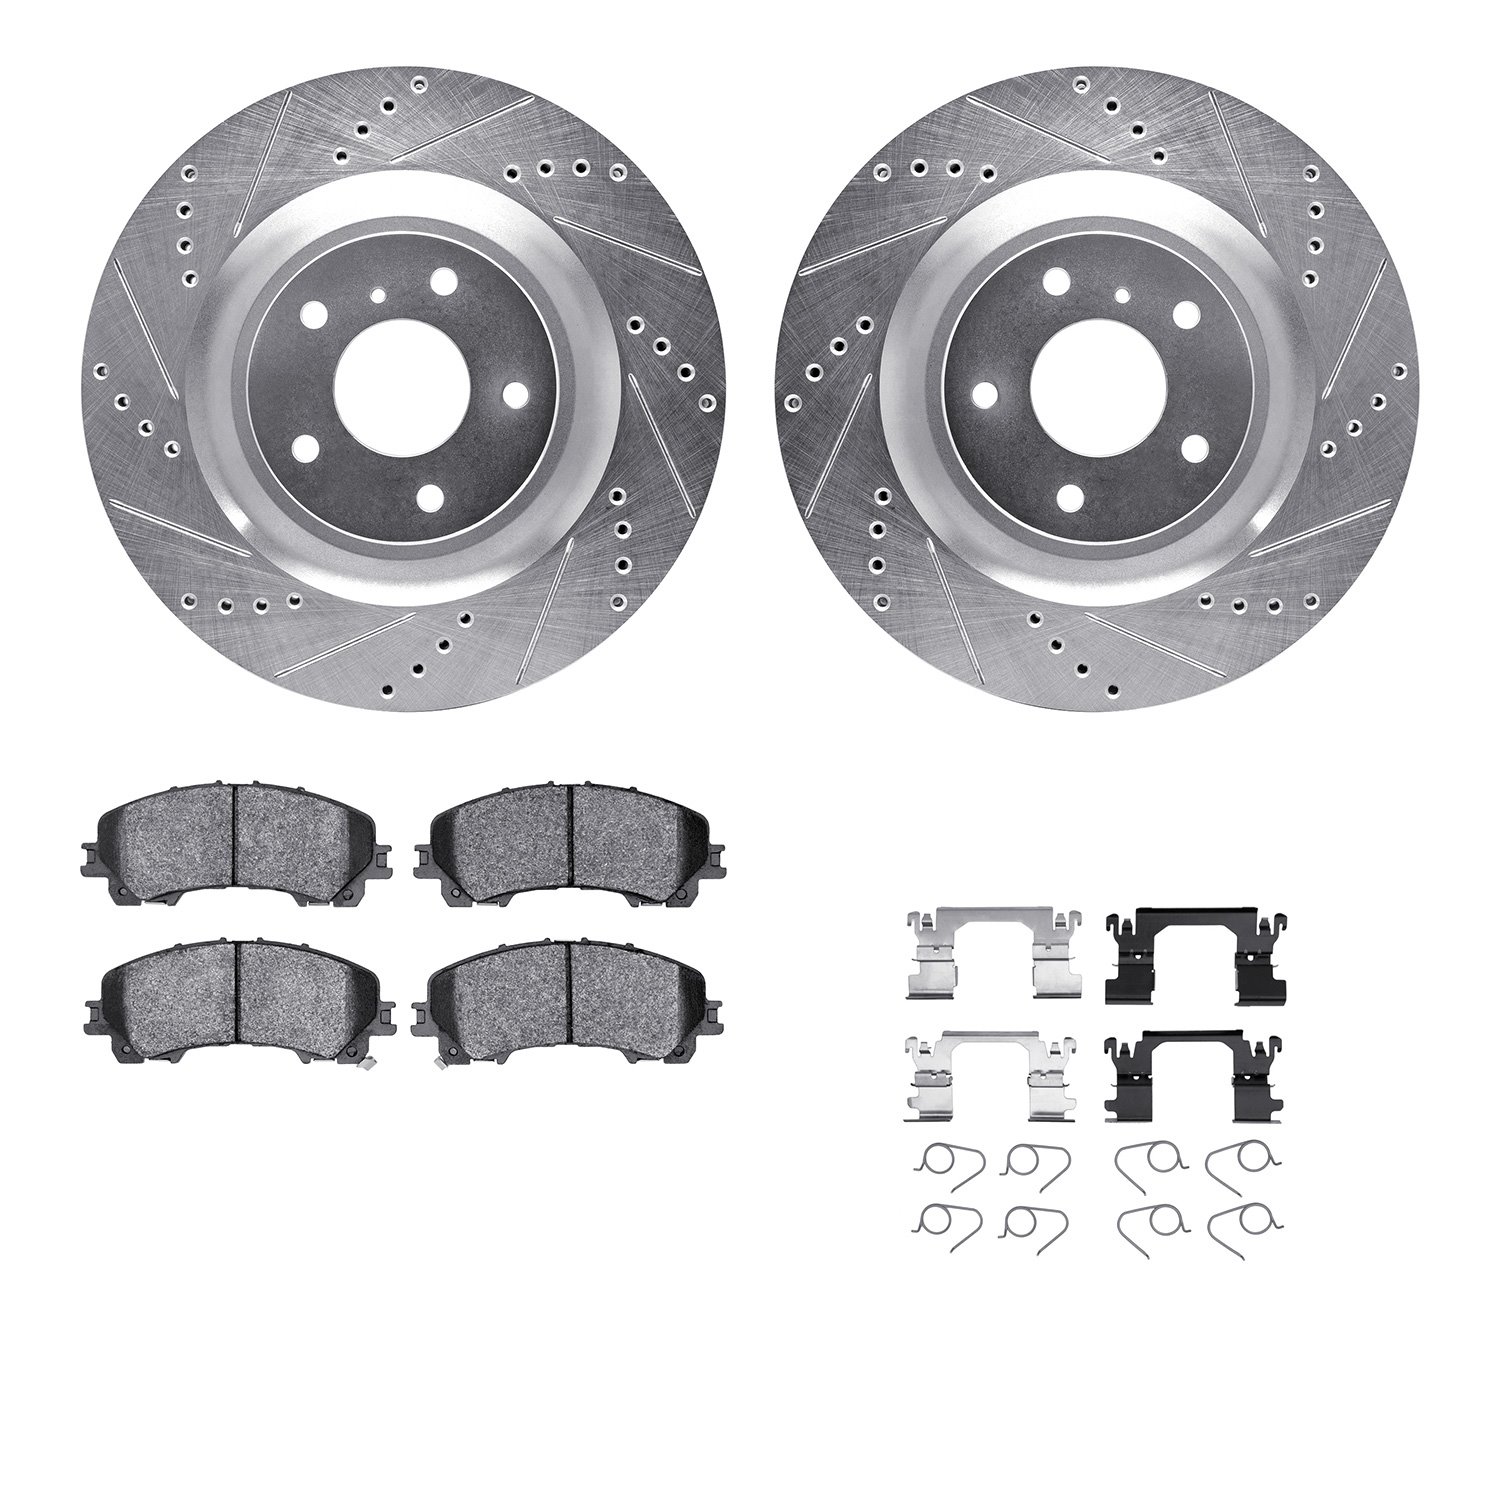 7512-68014 Drilled/Slotted Brake Rotors w/5000 Advanced Brake Pads Kit & Hardware [Silver], Fits Select Infiniti/Nissan, Positio